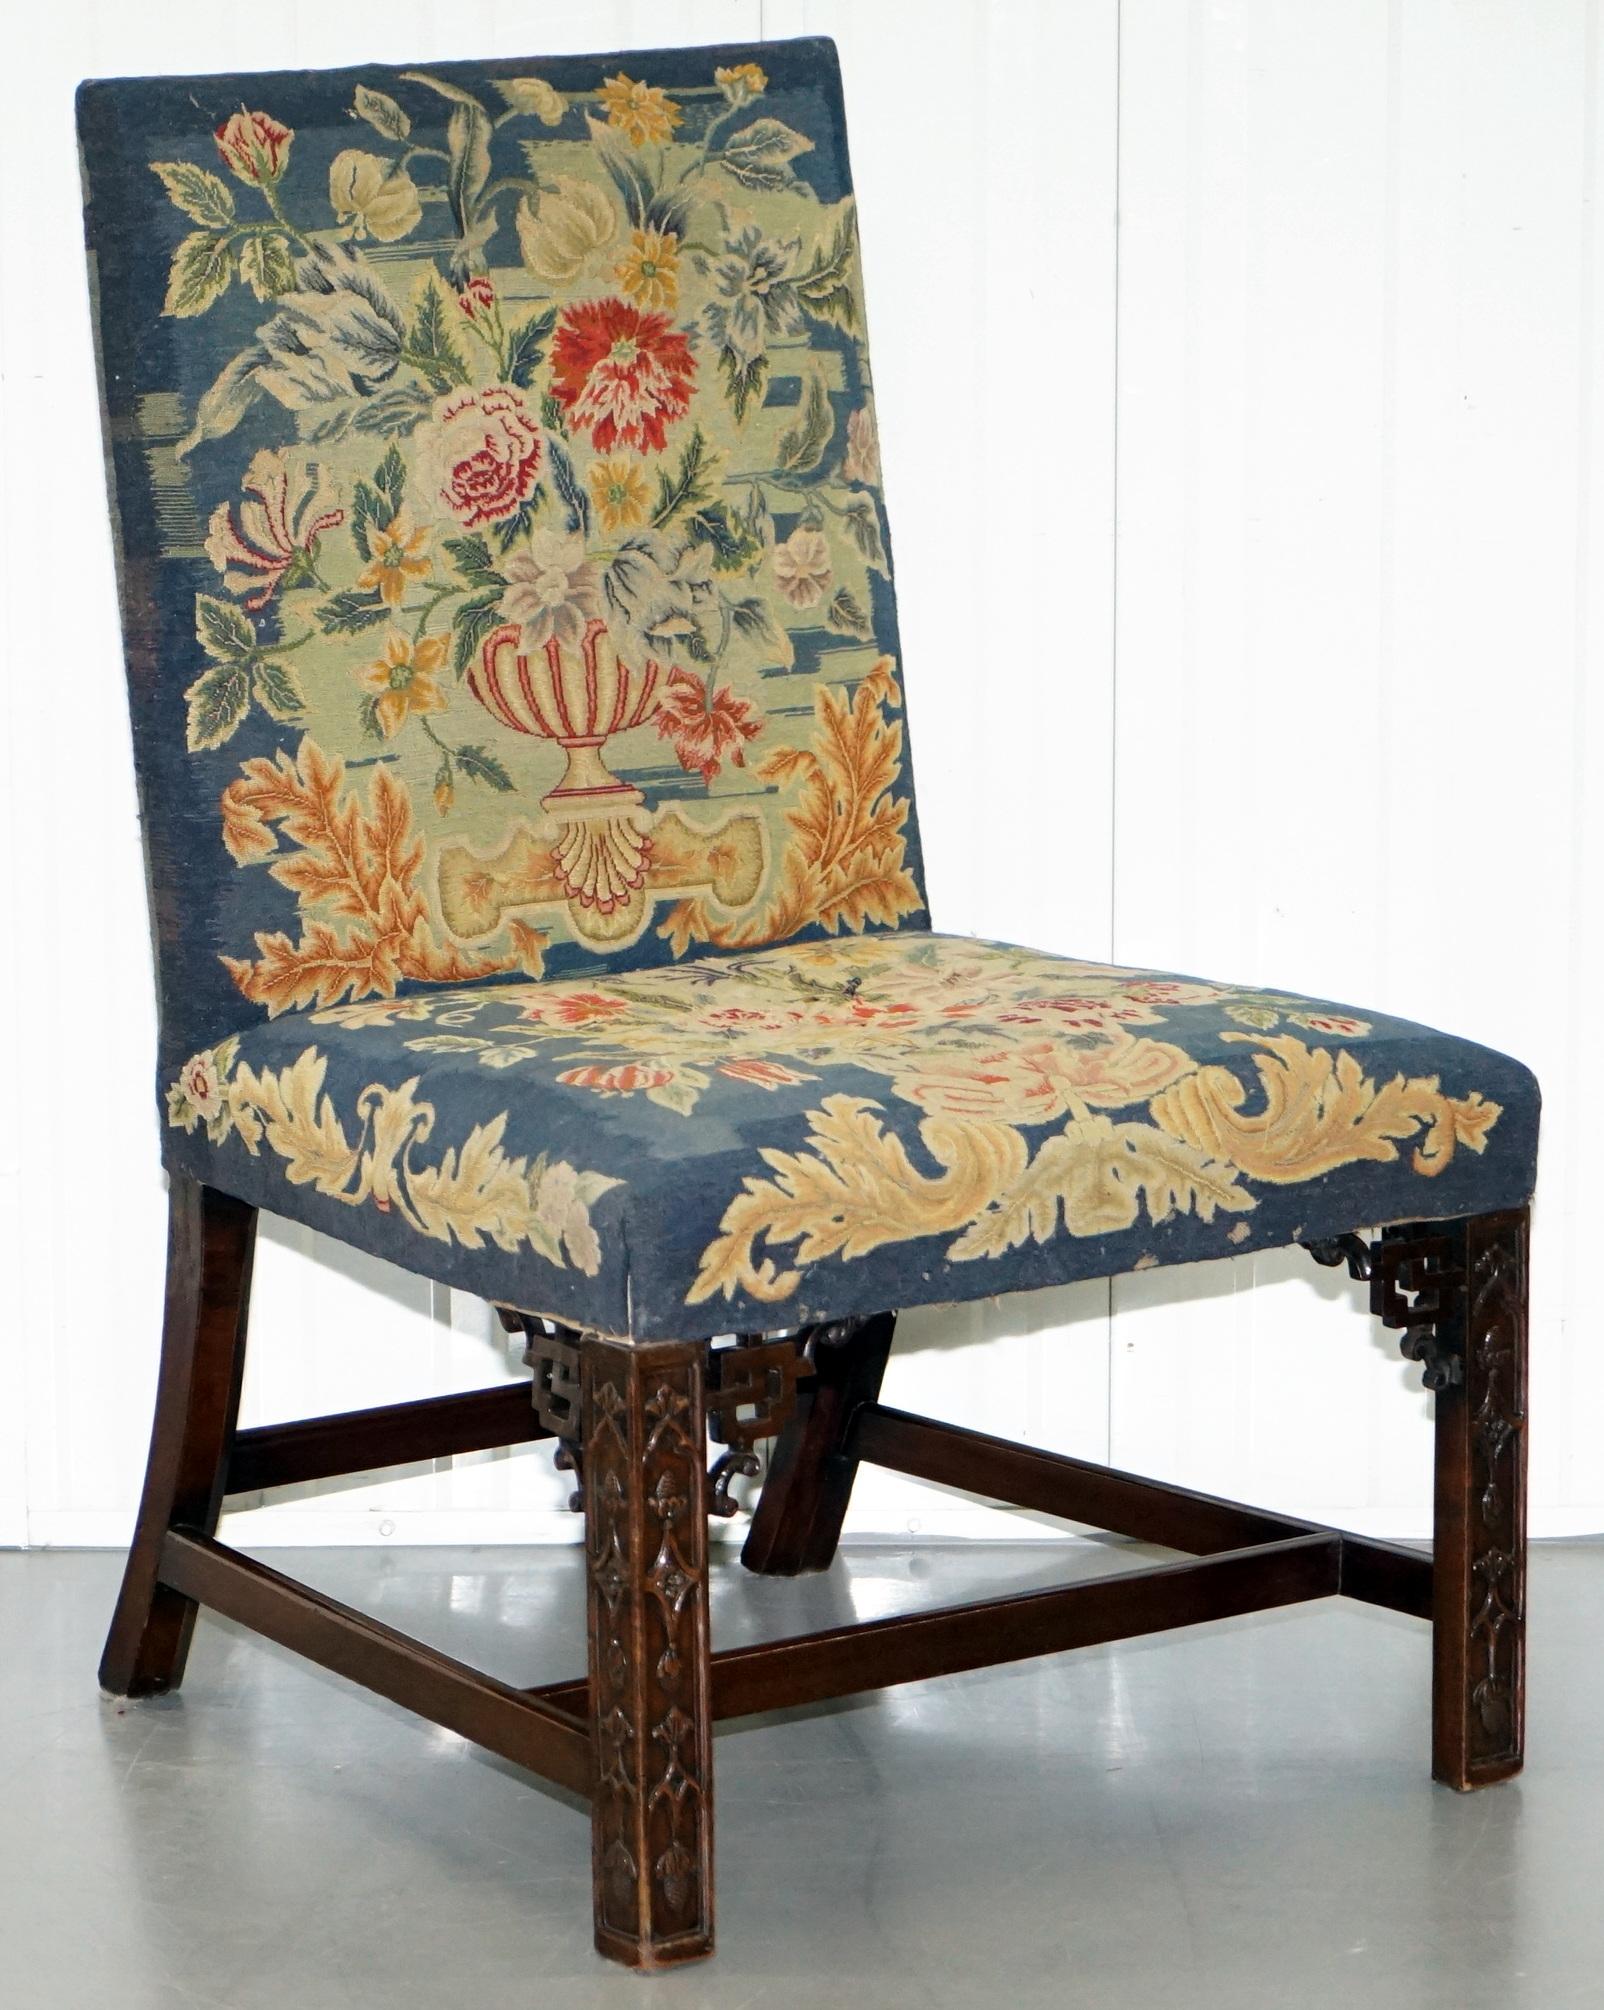 We are delighted to this very rare pair of Thomas Chippendale era circa 1760 Library chairs with period embroidered upholstery 

These are a very rare and highly collectible pair of Library chairs, they were made in the Chippendale era and closely